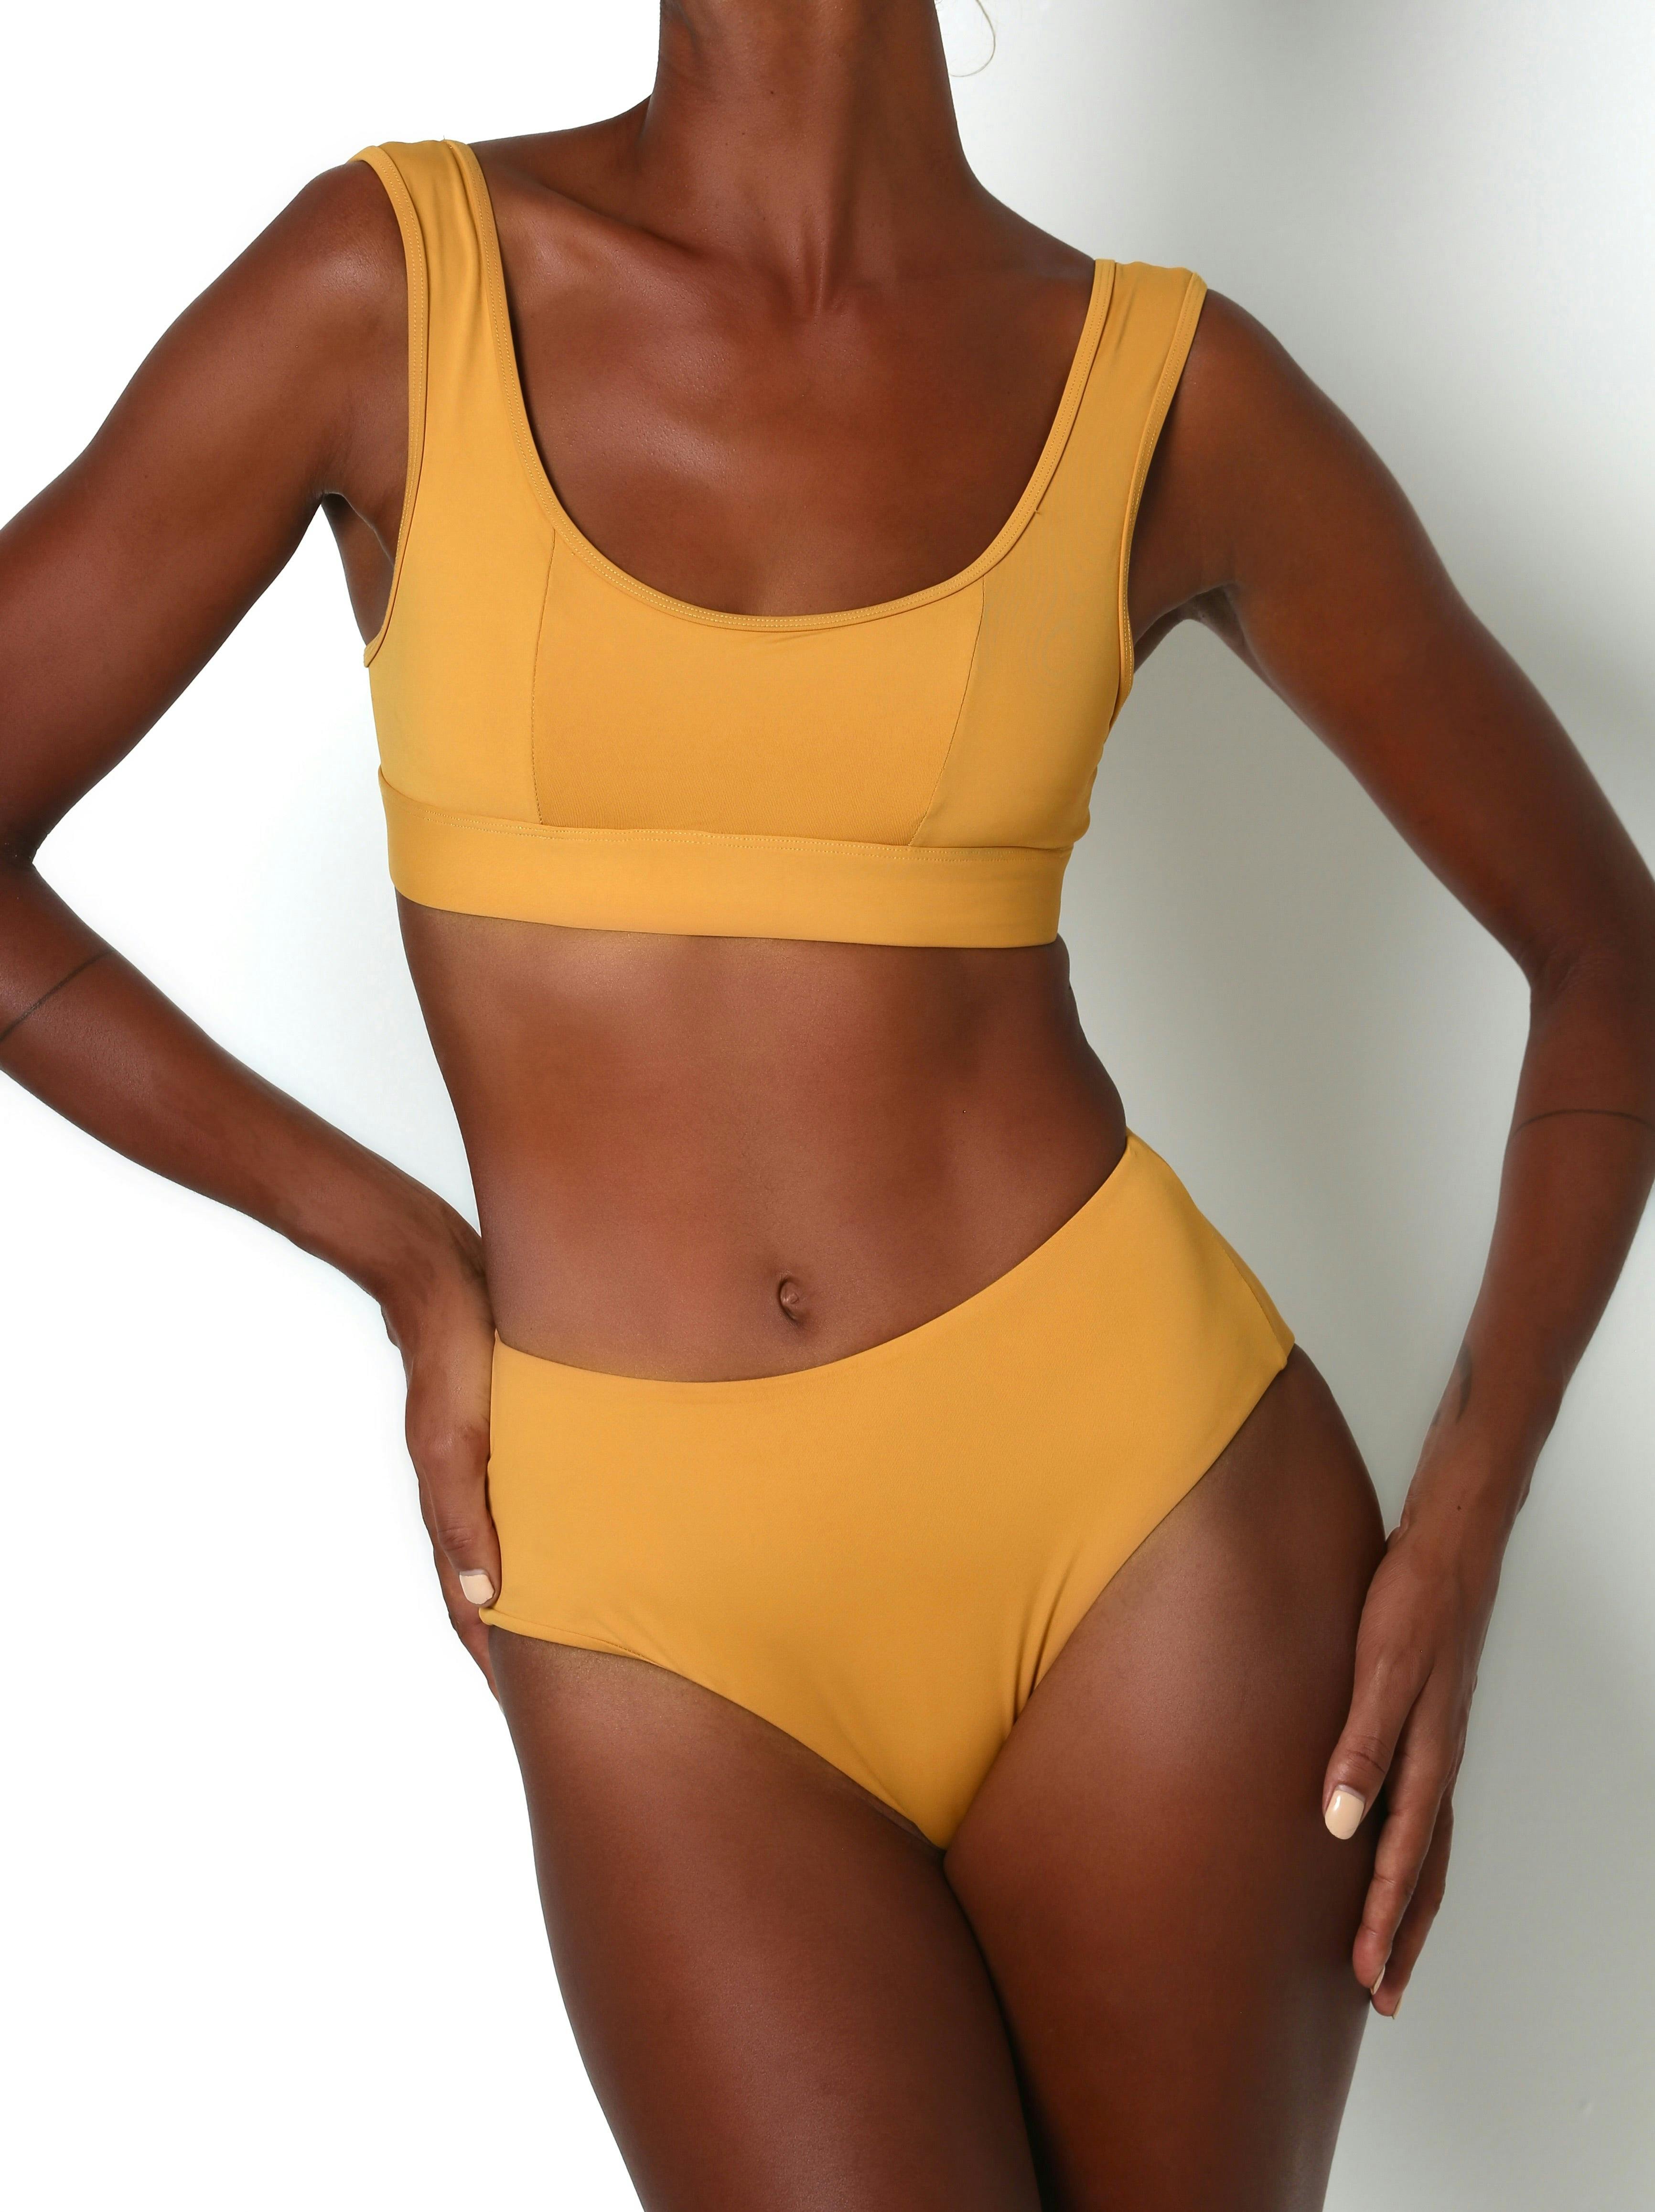 The Angelou Top Turmeric, a product by Tigra the Label